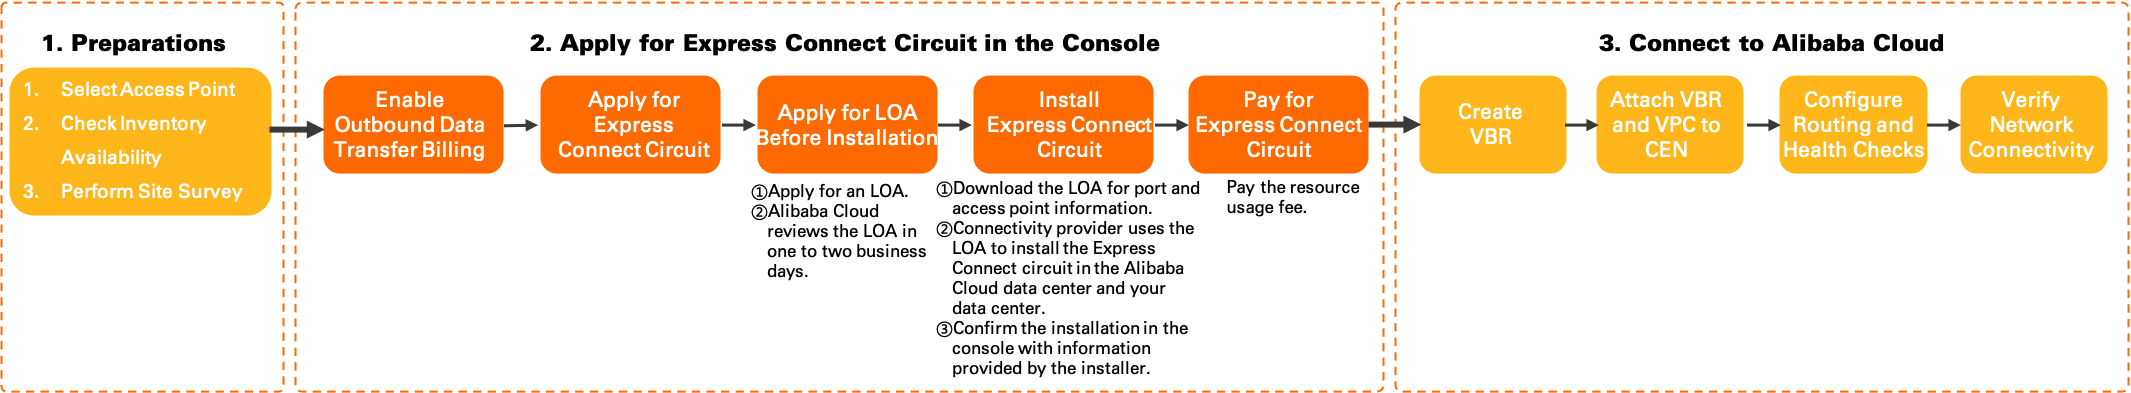 Connect to Alibaba Cloud through a dedicated Express Connect circuit